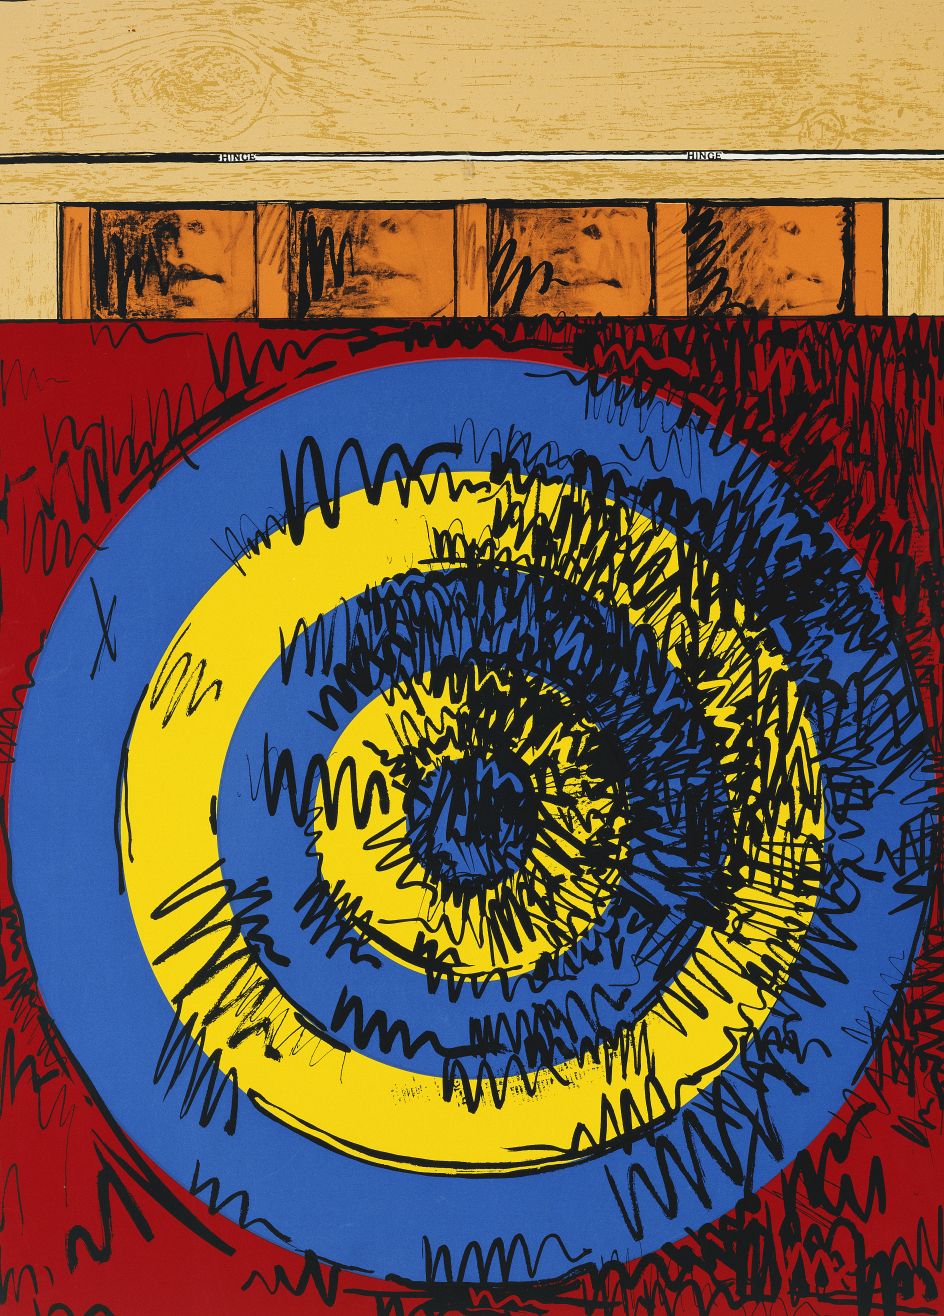 Jasper Johns Target with Four Faces, 1968 Silkscreen print on paper, 91.6 × 66.7 cm. © Jasper Johns/DACS, London/VAGA, NY 2018. Collection: The Provost and Scholars of King’s College, Cambridge